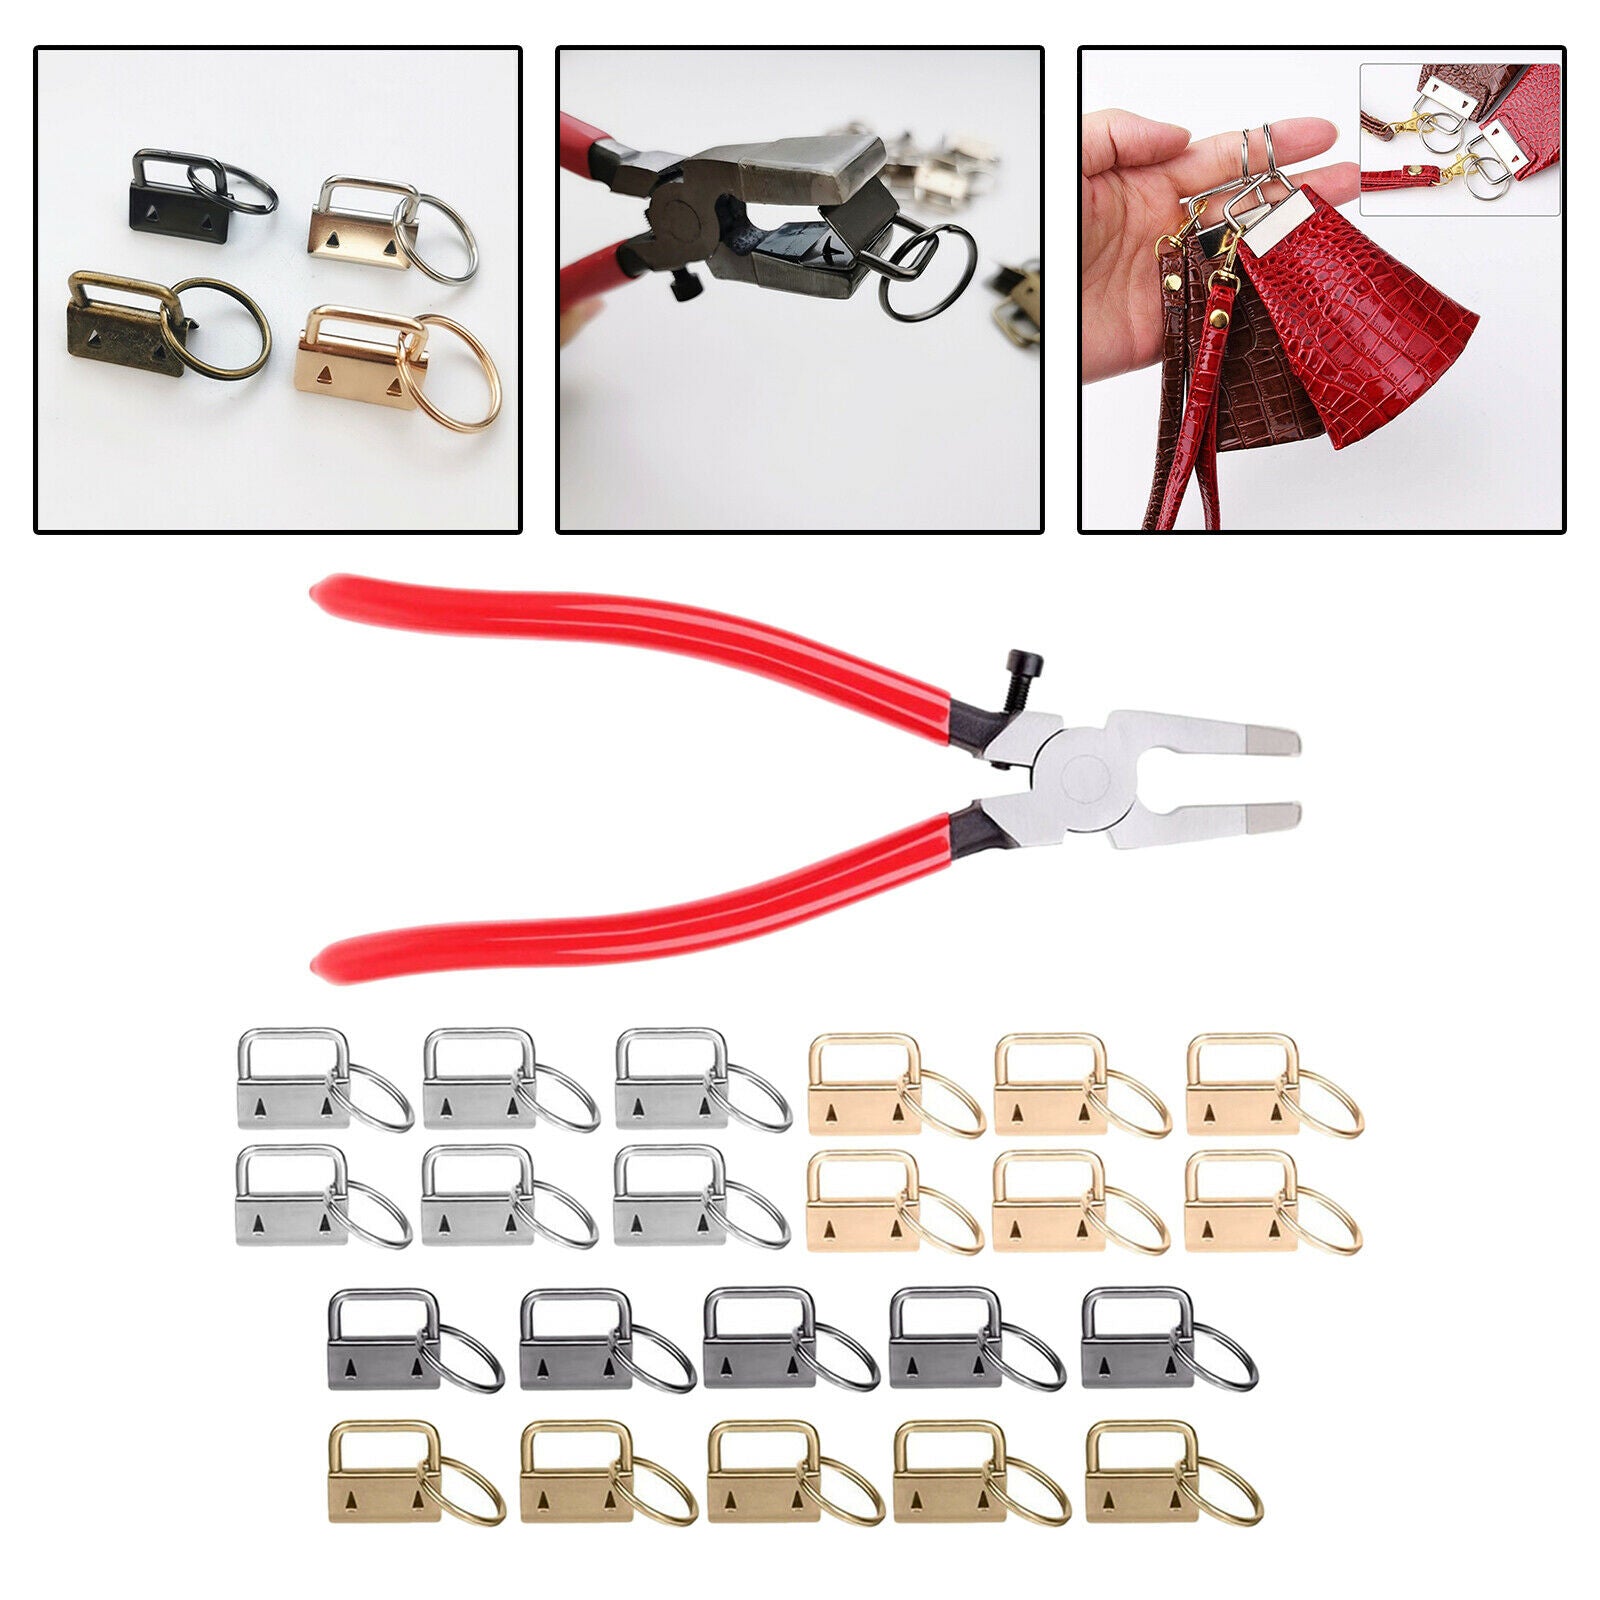 Key Fob Hardware 22PCS 1 Inch Glass Running Pliers Tool for Wristlet Clamp